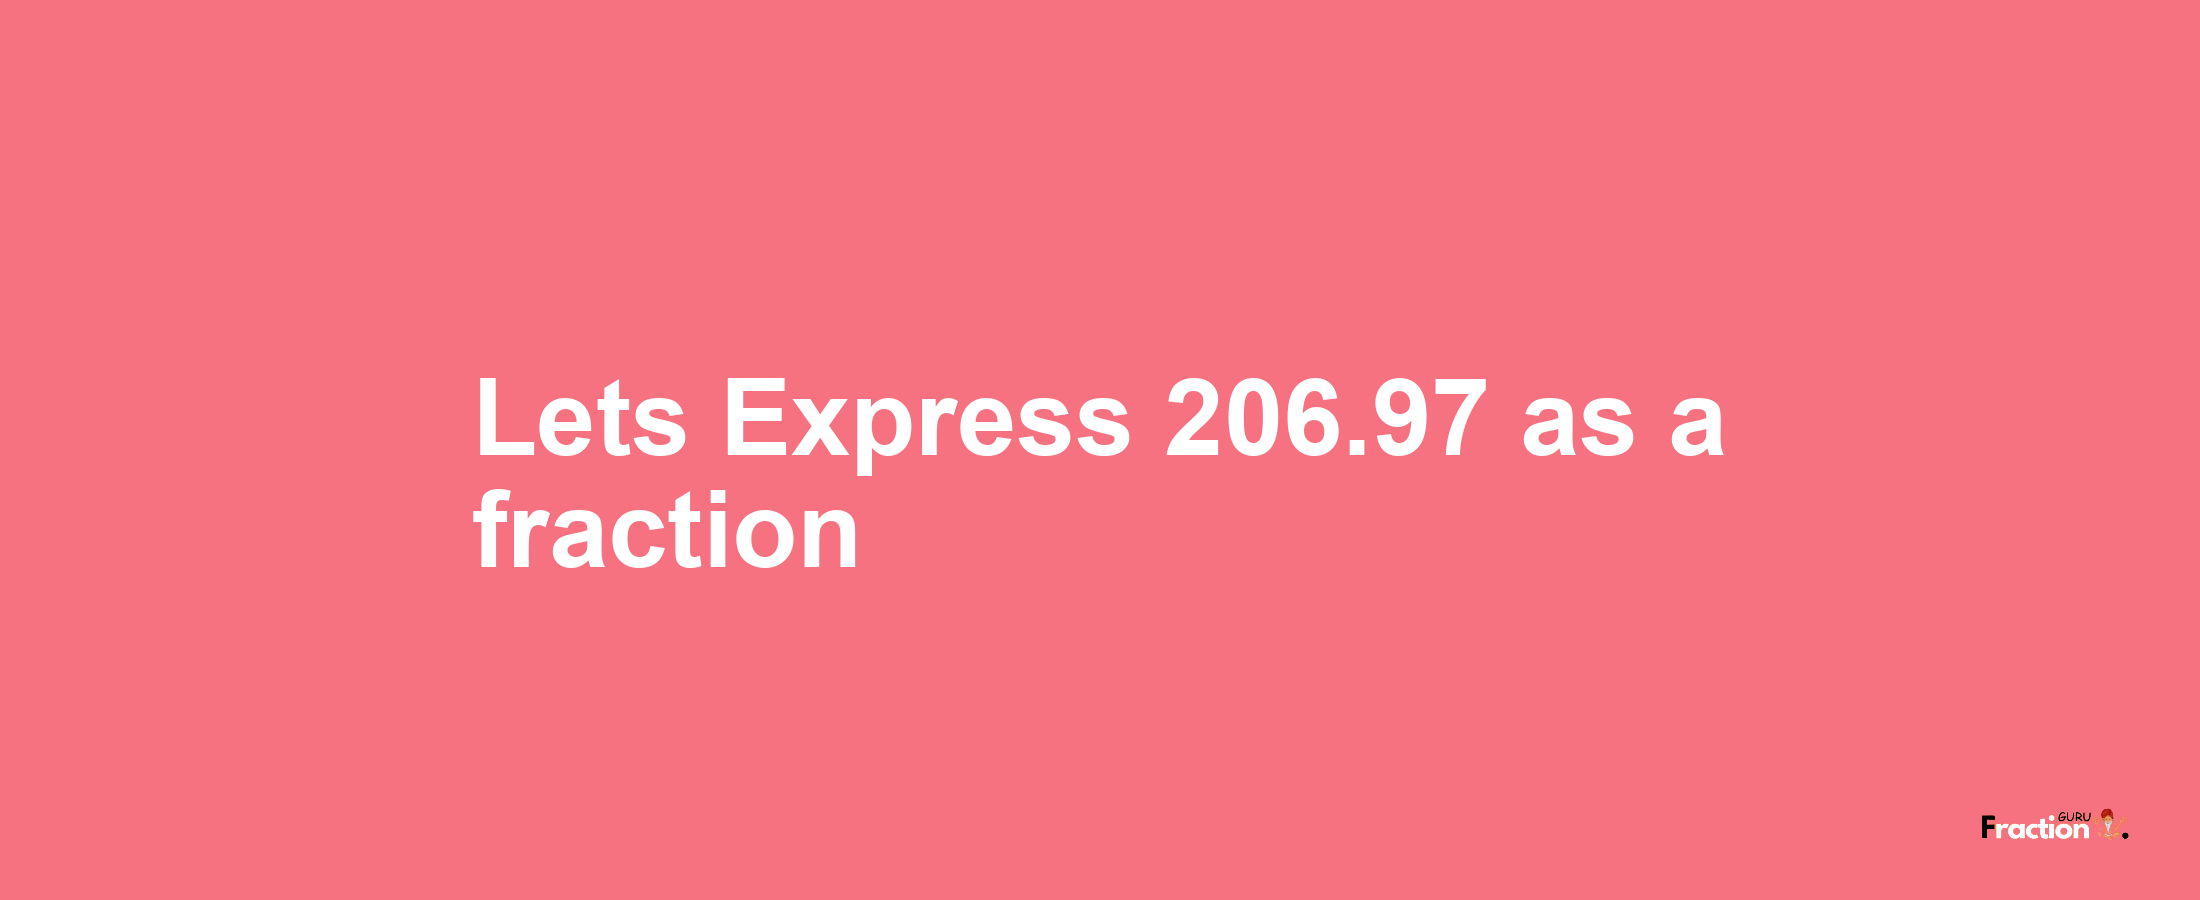 Lets Express 206.97 as afraction